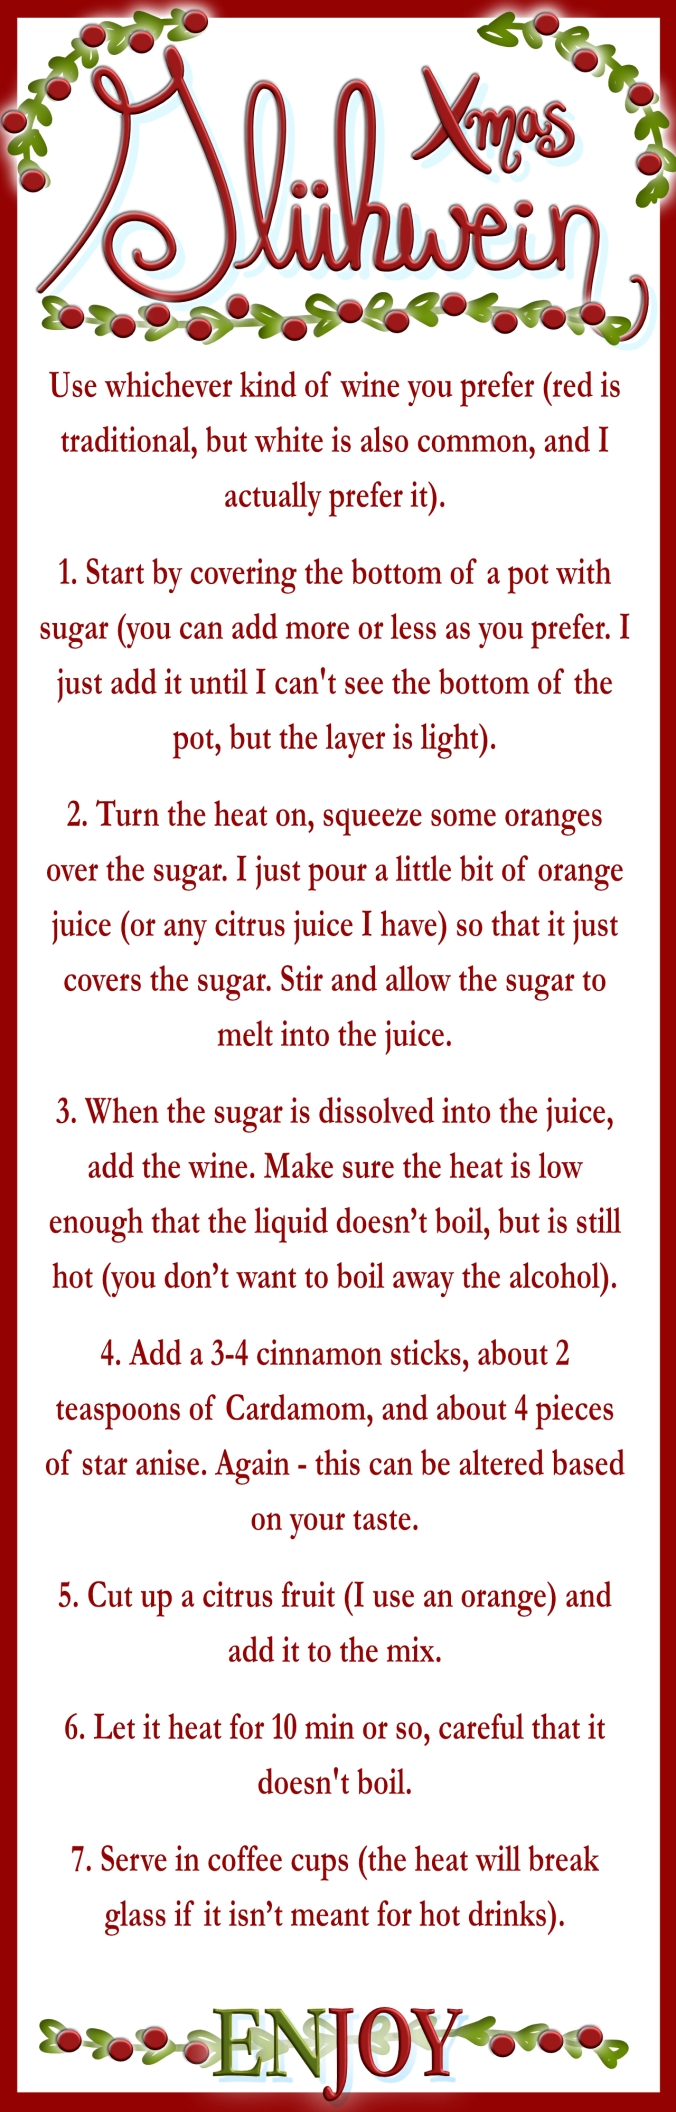 Use whichever kind of wine you prefer (red is traditional, but white is also common, and I actually prefer it). 1. Start by covering the bottom of a pot with sugar (you can add more or less as you prefer. I just add it until I can't see the bottom of the pot, but the layer is light). 2. Turn the heat on, squeeze some oranges over the sugar. I just pour a little bit of orange juice (or any citrus juice I have) so that it just covers the sugar. Stir and allow the sugar to melt into the juice. 3. When the sugar is dissolved into the juice, add the wine. Make sure the heat is low enough that the liquid doesn’t boil, but is still hot (you don’t want to boil away the alcohol). 4. Add a 3-4 cinnamon sticks, about 2 teaspoons of Cardamom, and about 4 pieces of star anise. Again - this can be altered based on your taste. 5. Cut up a citrus fruit (I use an orange) and add it to the mix. 6. Let it heat for 10 min or so, careful that it doesn't boil. 7. Serve in coffee cups (the heat will break glass if it isn’t meant for hot drinks). Enjoy!